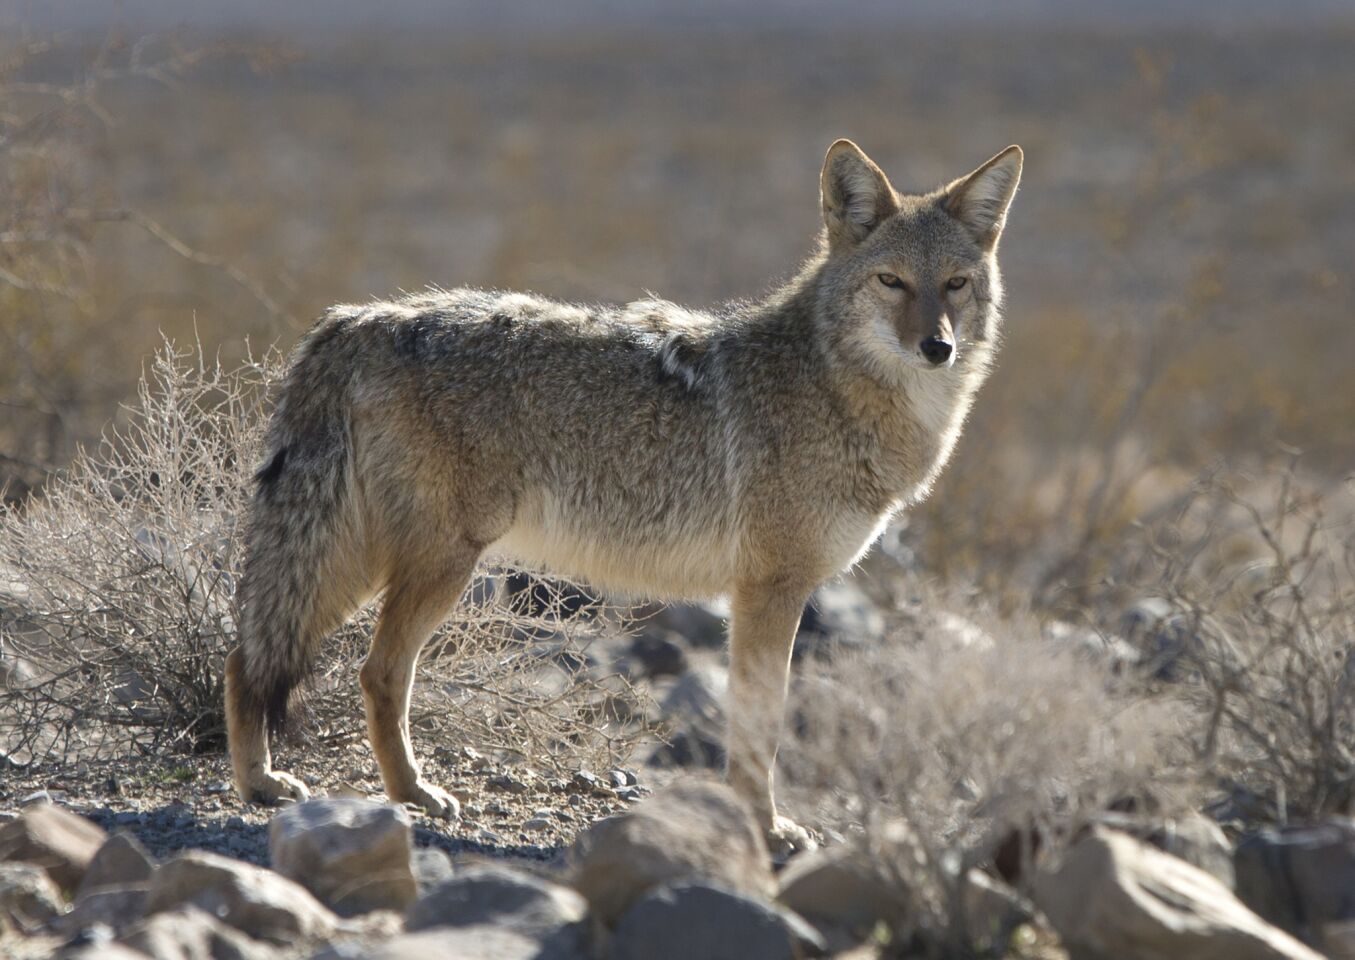 A coyote near Panamint Springs.